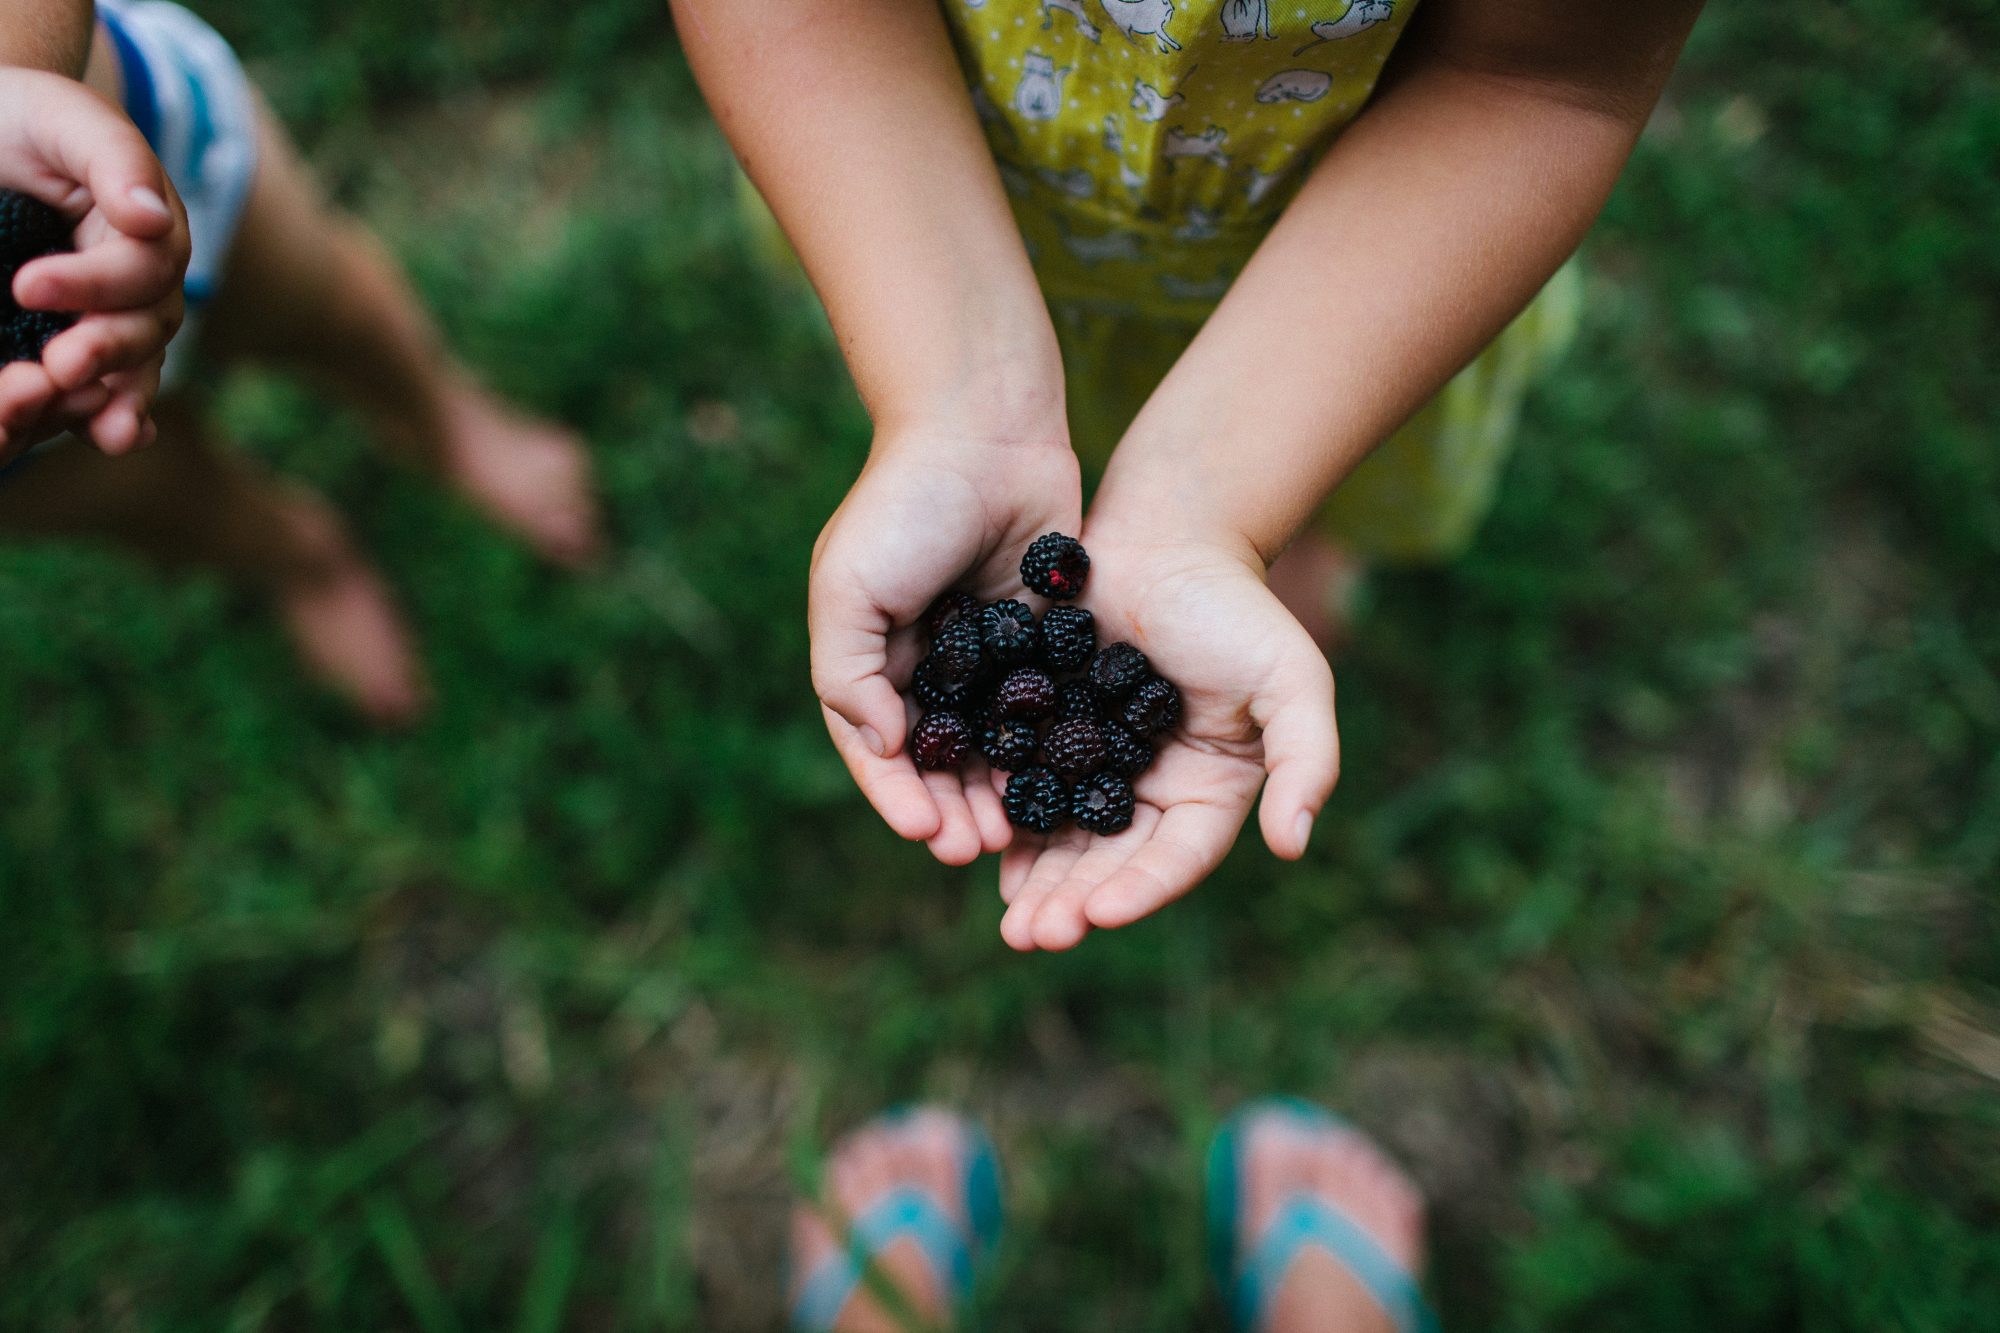 Child hands holding a handful of blackberries